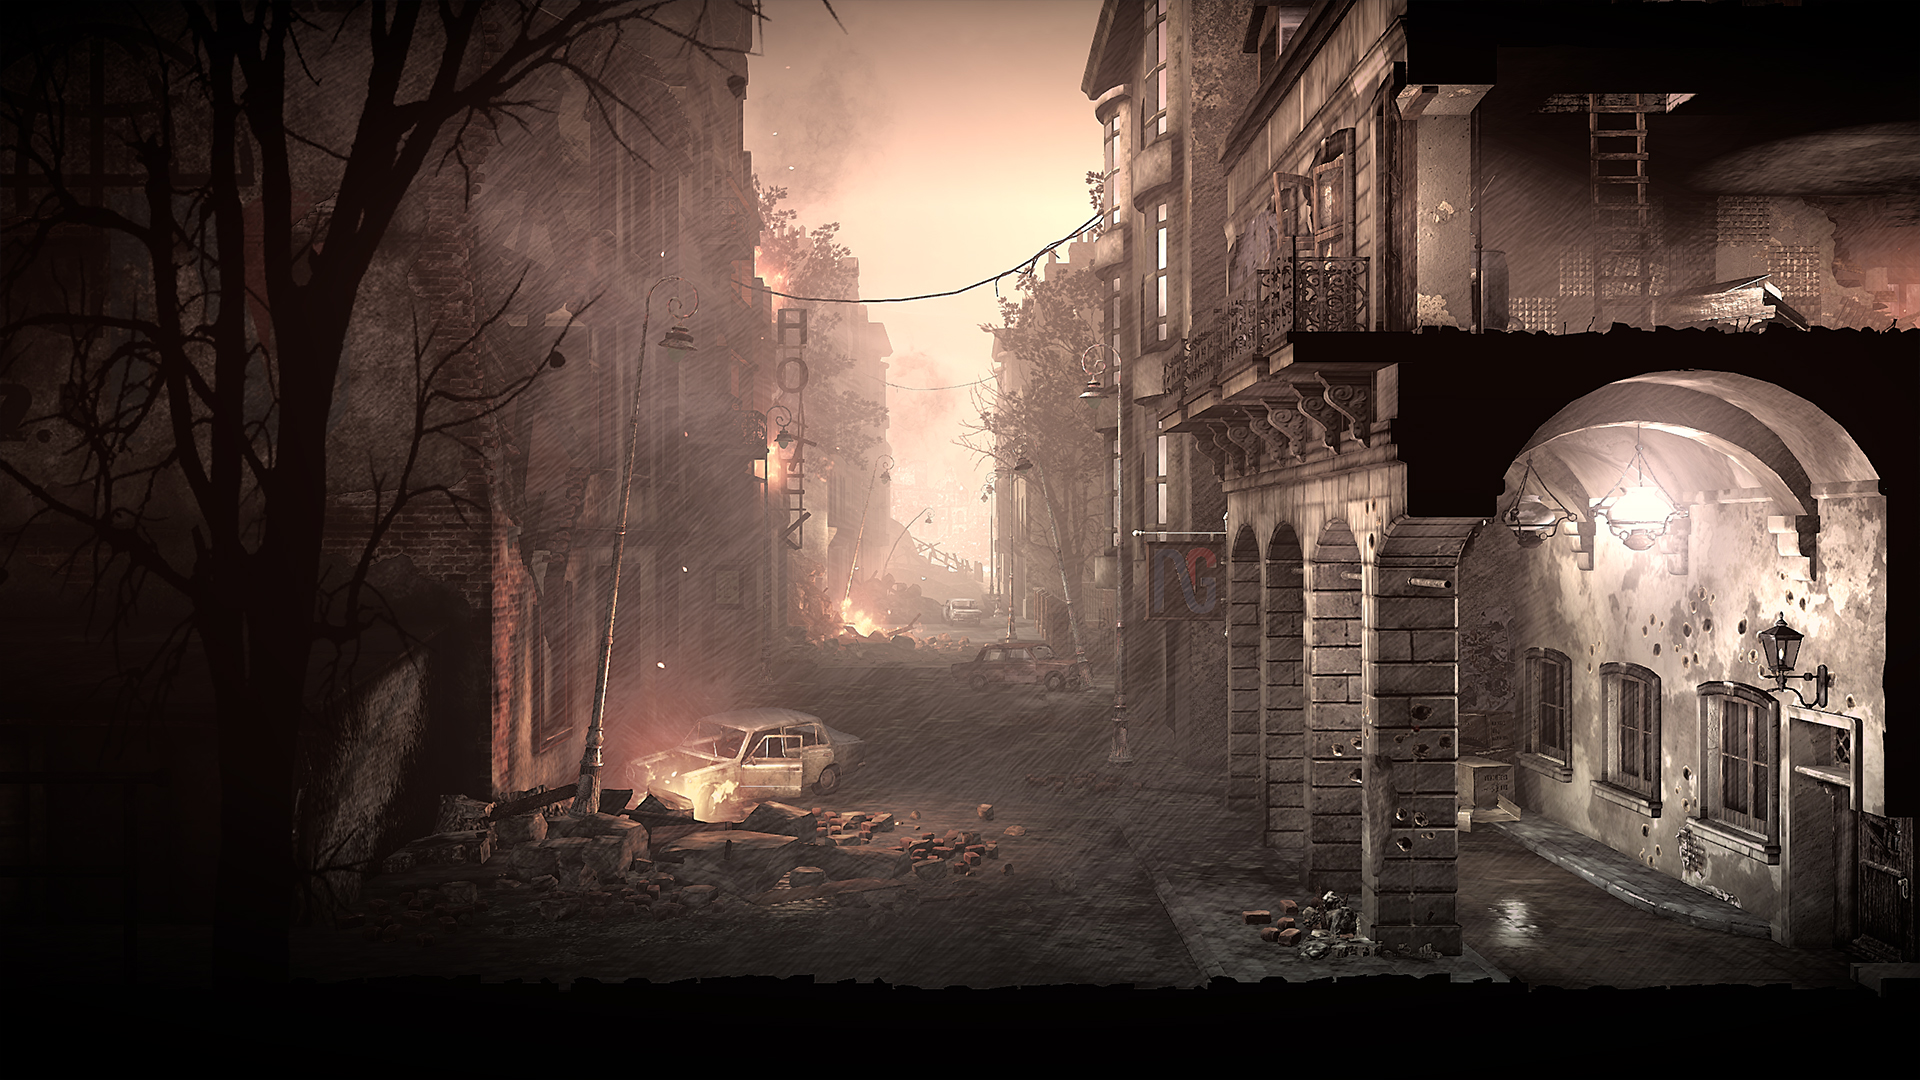 In November, this War Of Mine will receive a major addition to The Last Broadcast